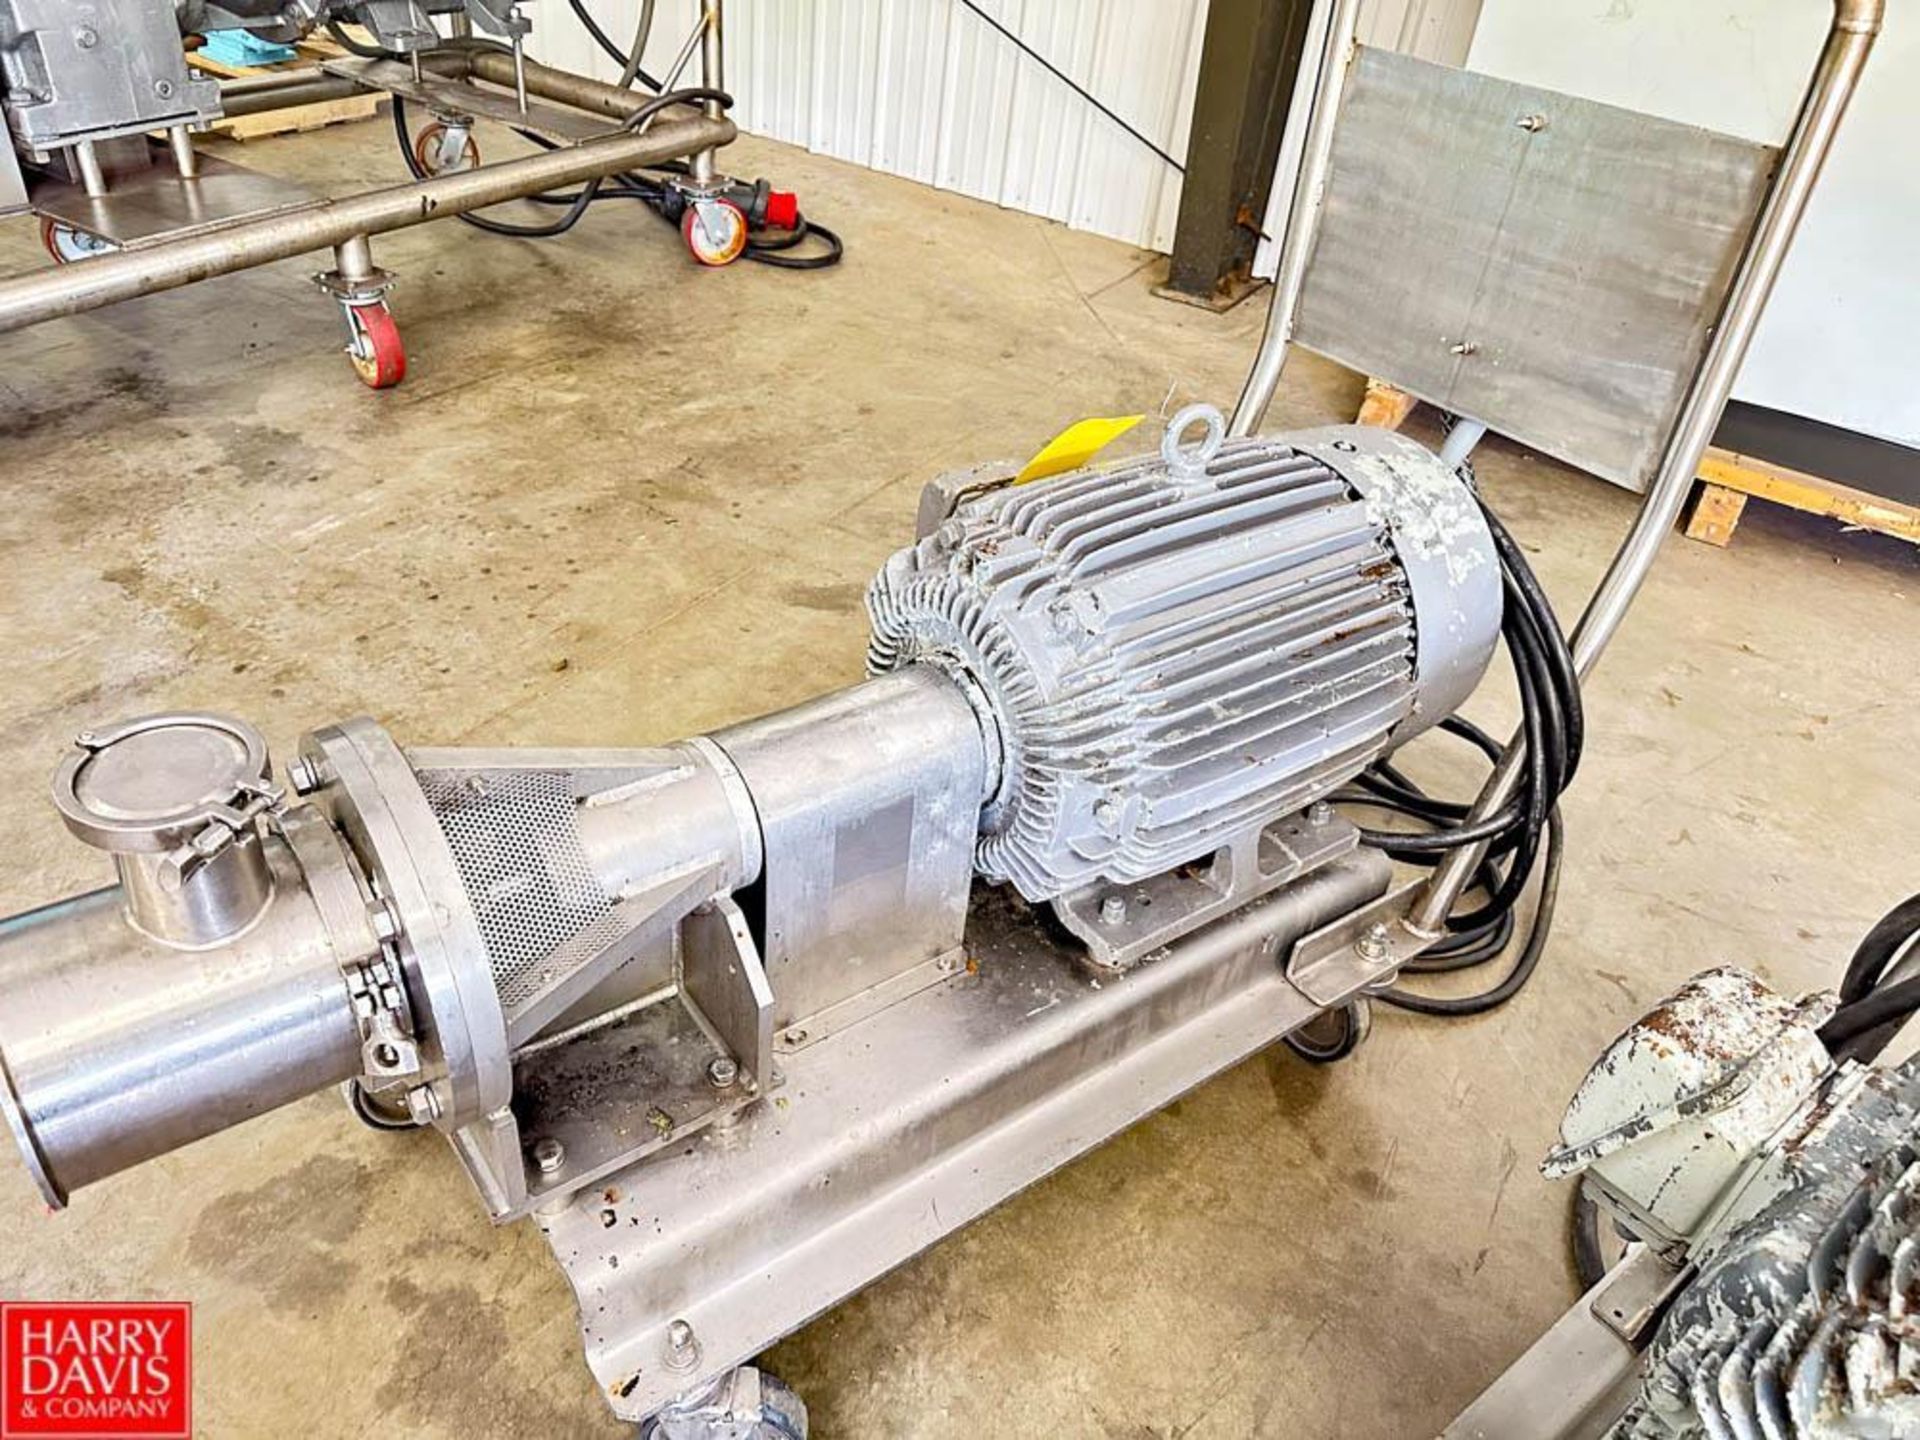 2017 Greerco High-Shear Pump, Model: 6STSPLSS, S/N: 3062520-1 with 3.5" x 3.5" S/S Head, Clamp-Type - Image 3 of 4